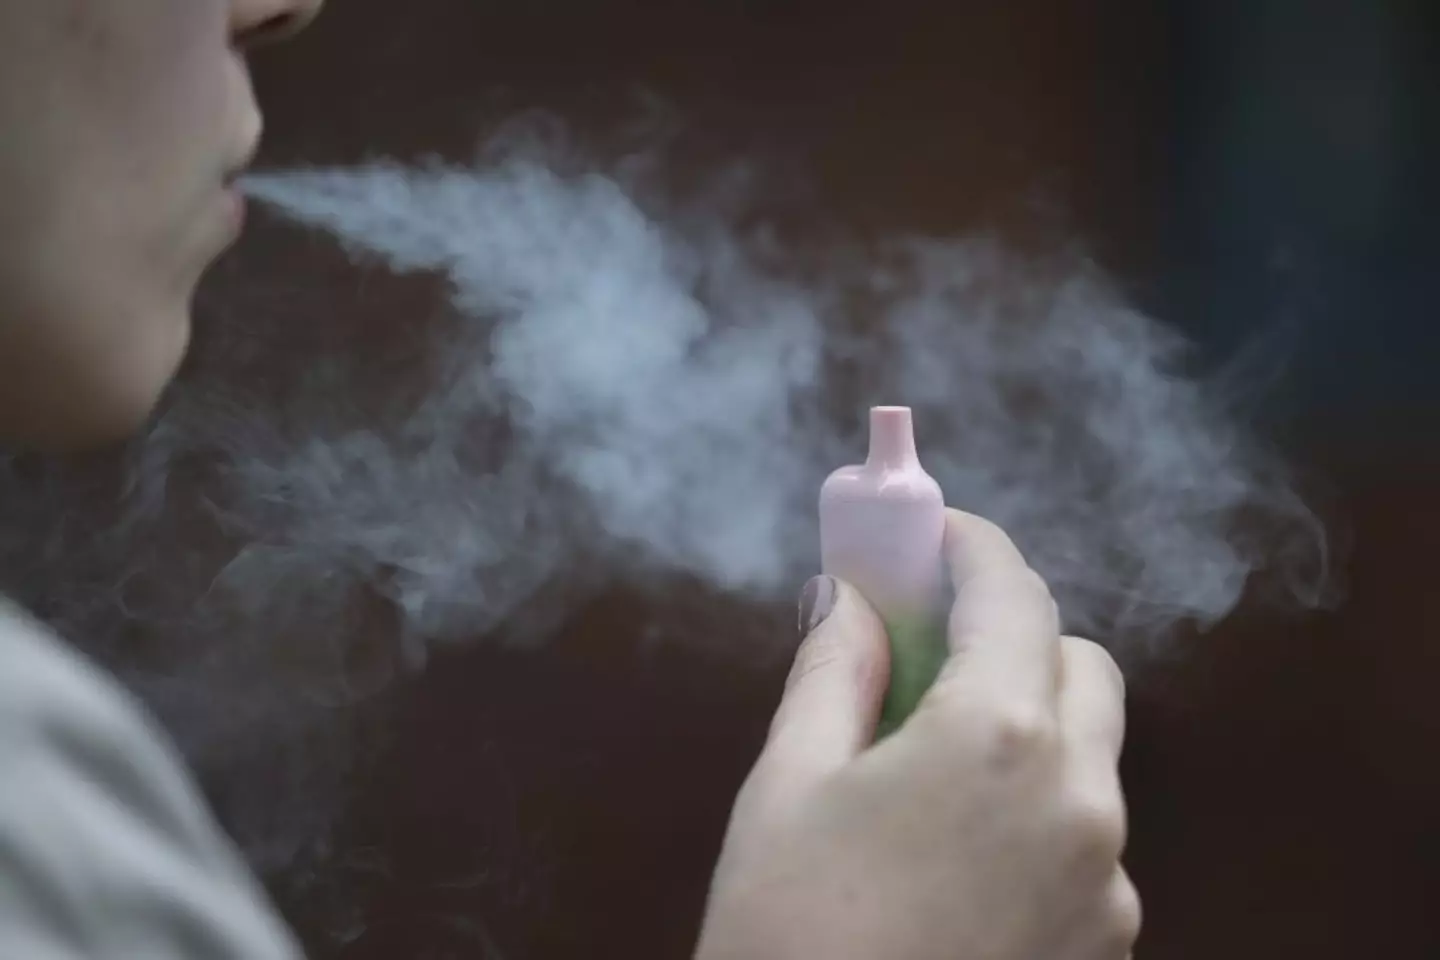 There's been a shocking rise in young people using disposable vapes.